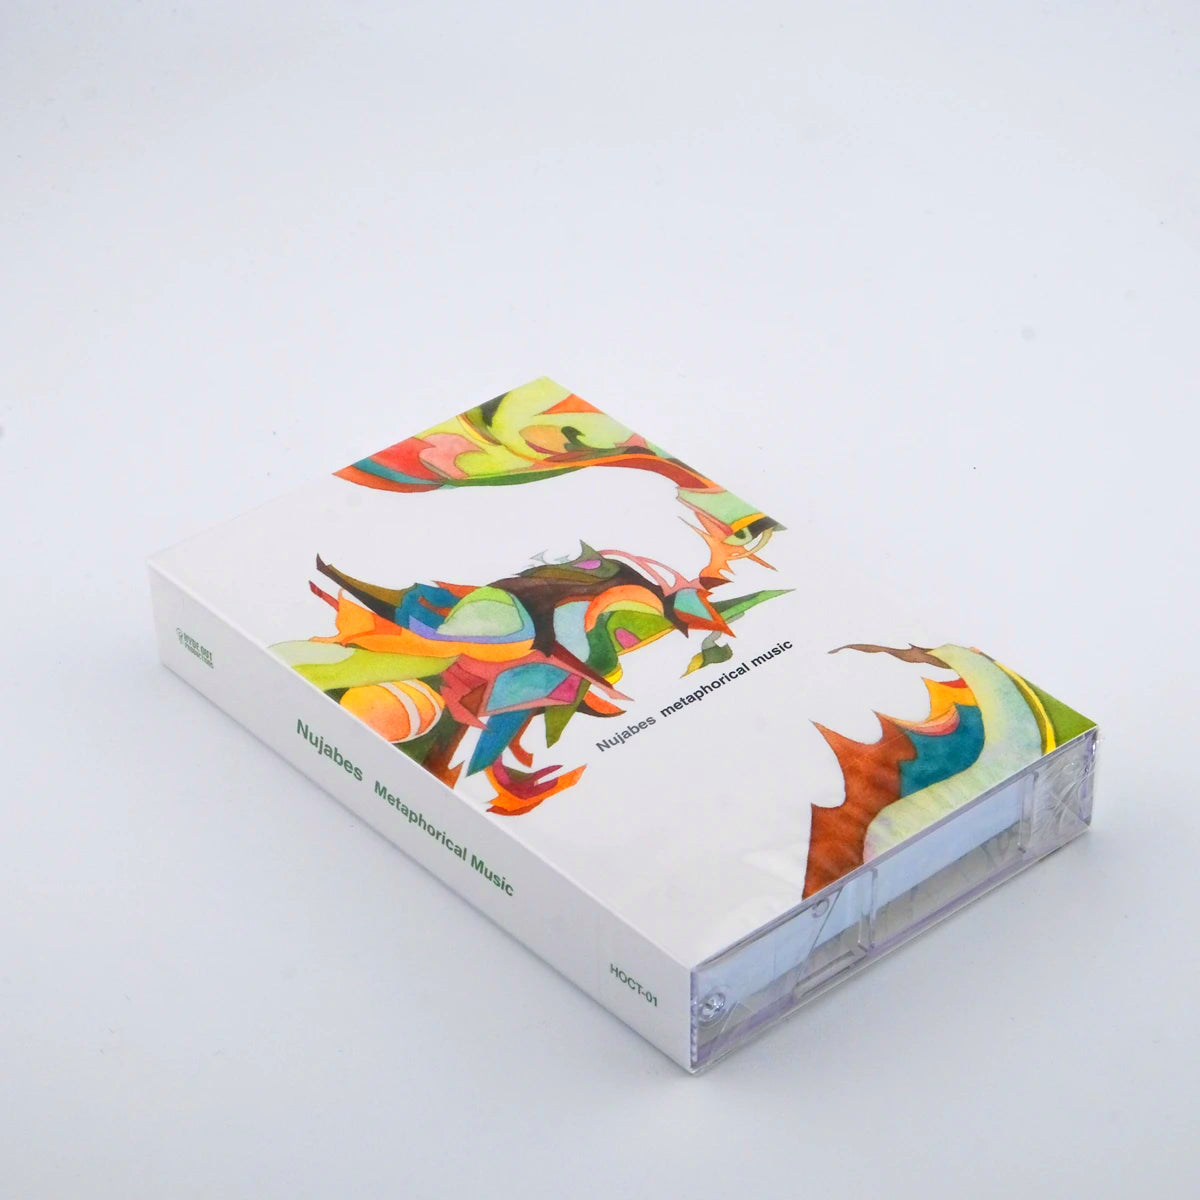 Nujabes: Metaphorical Music Cassette